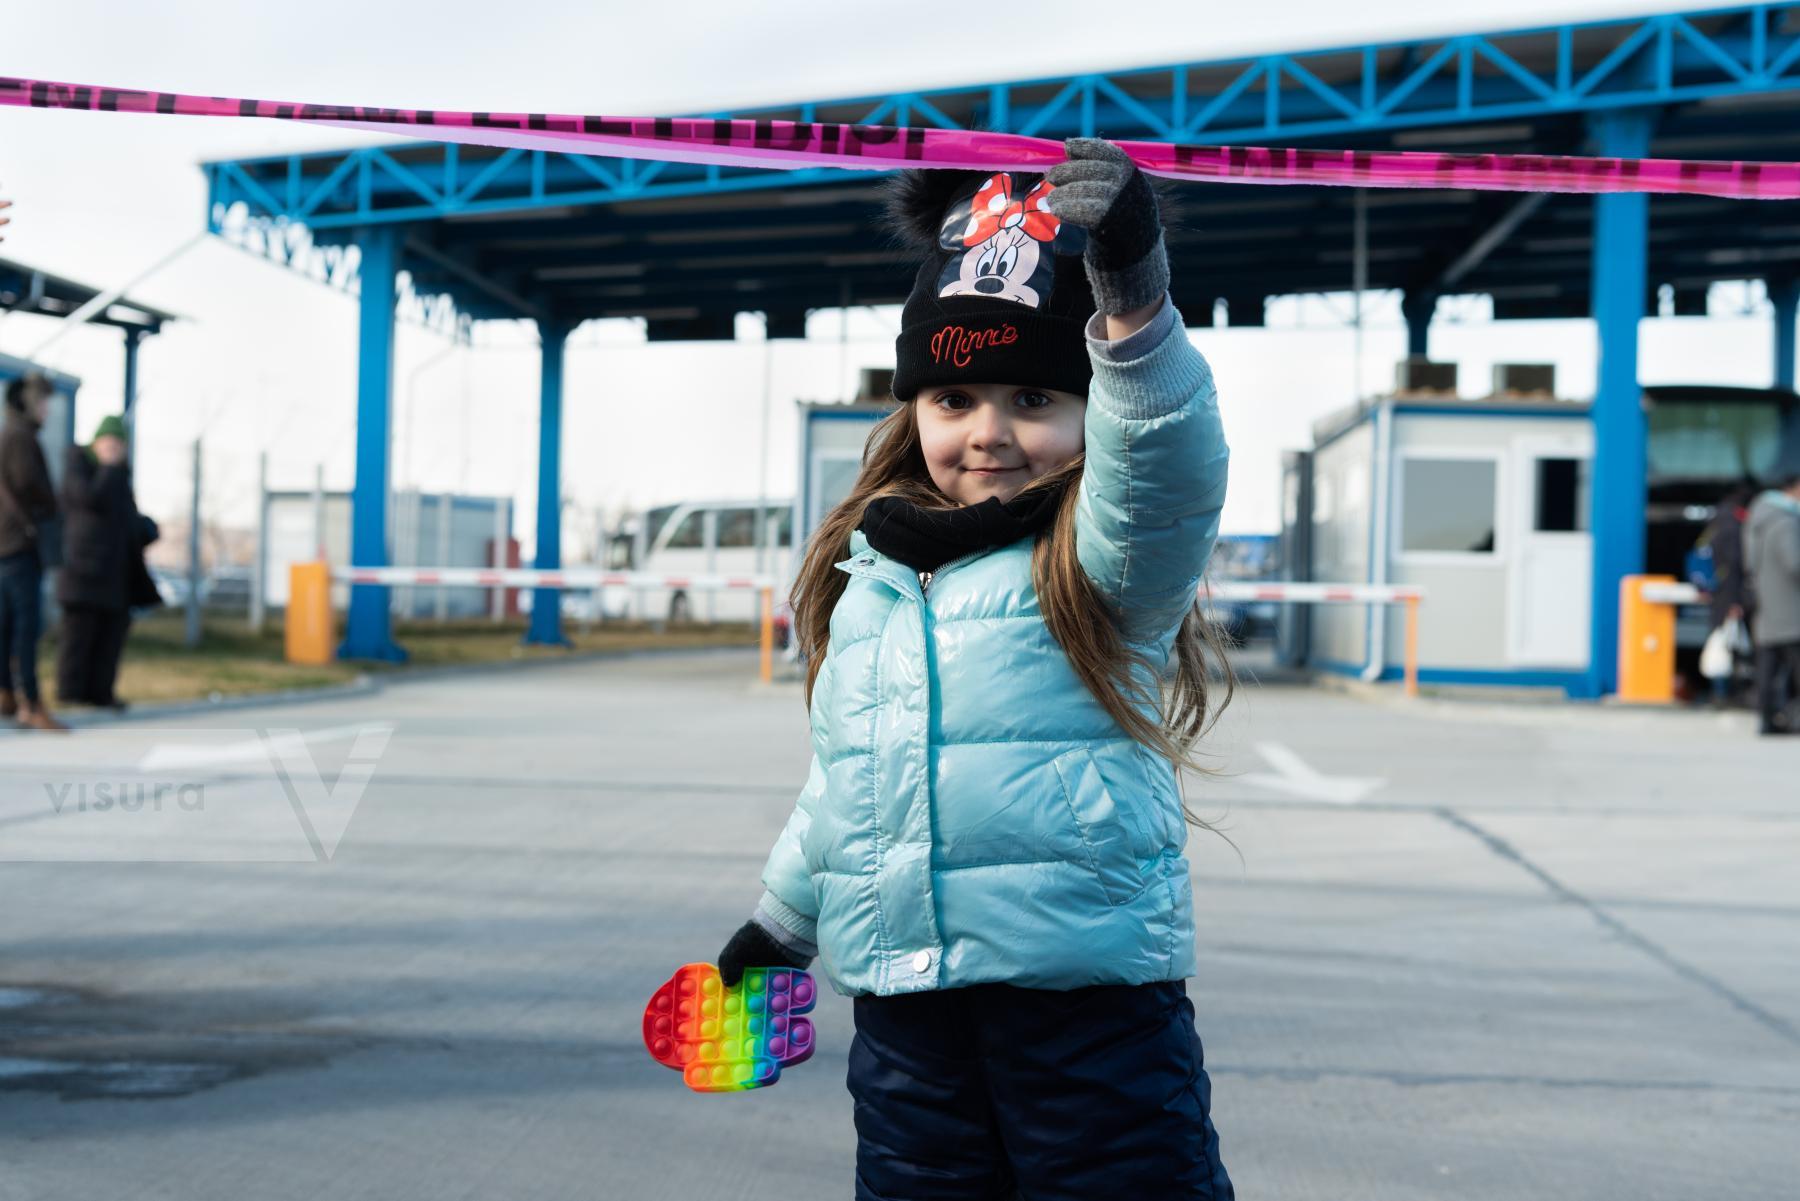 Purchase Ukrainian girl at the border station of Isaccea, Romania after crossing the border with Ukraine., February 27, 2022. by Odysseas Chloridis